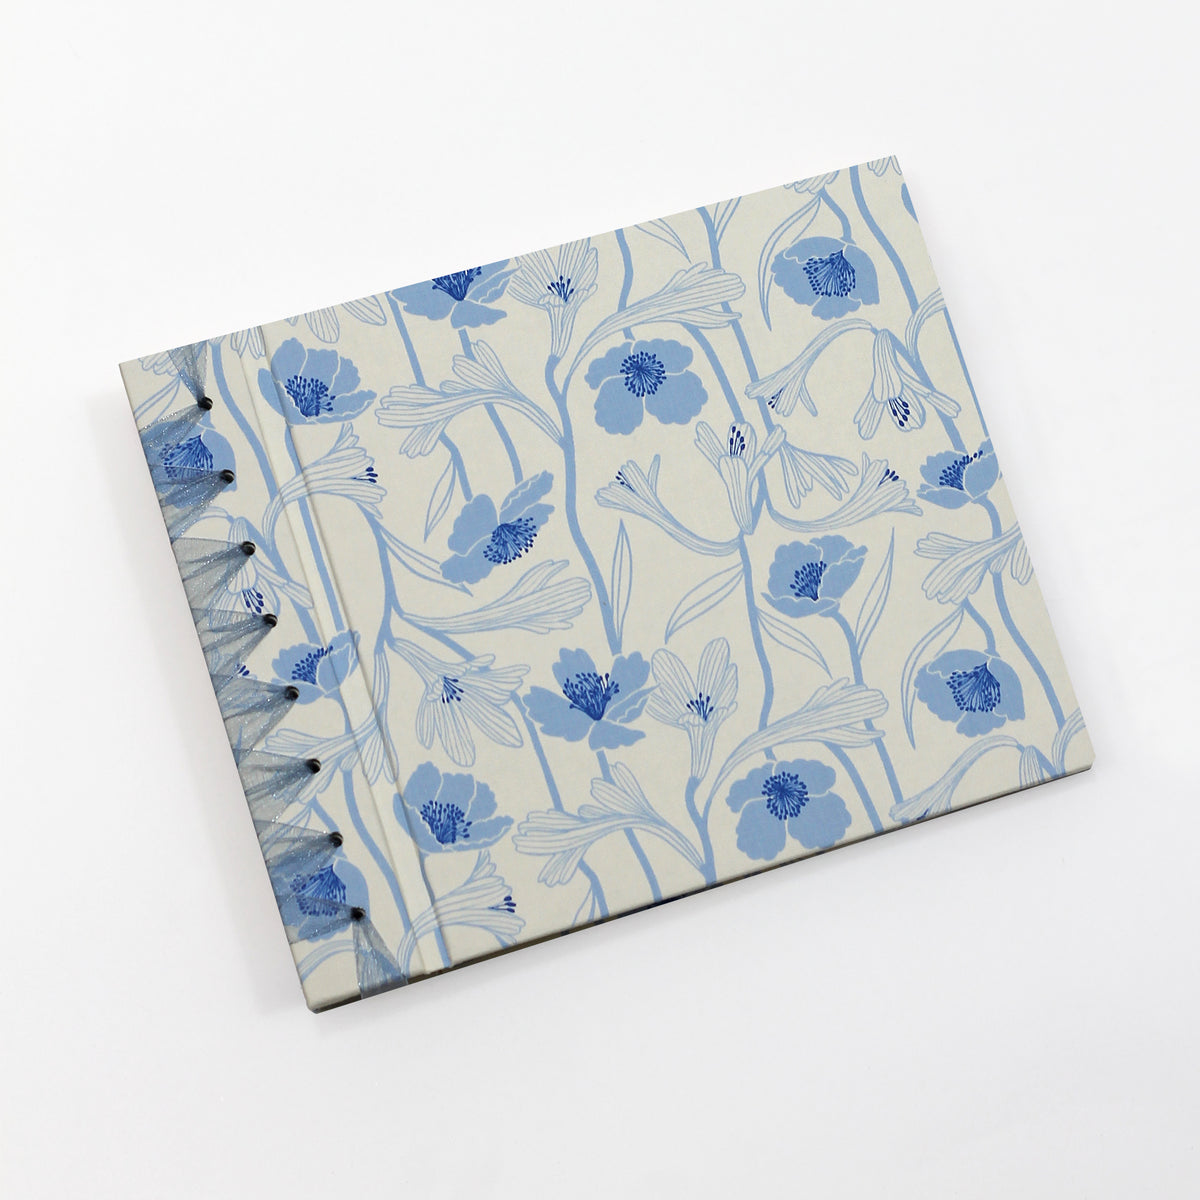 Small 9 x 12 Paper Page Album | Limited Edition Cover: Water Flowers White